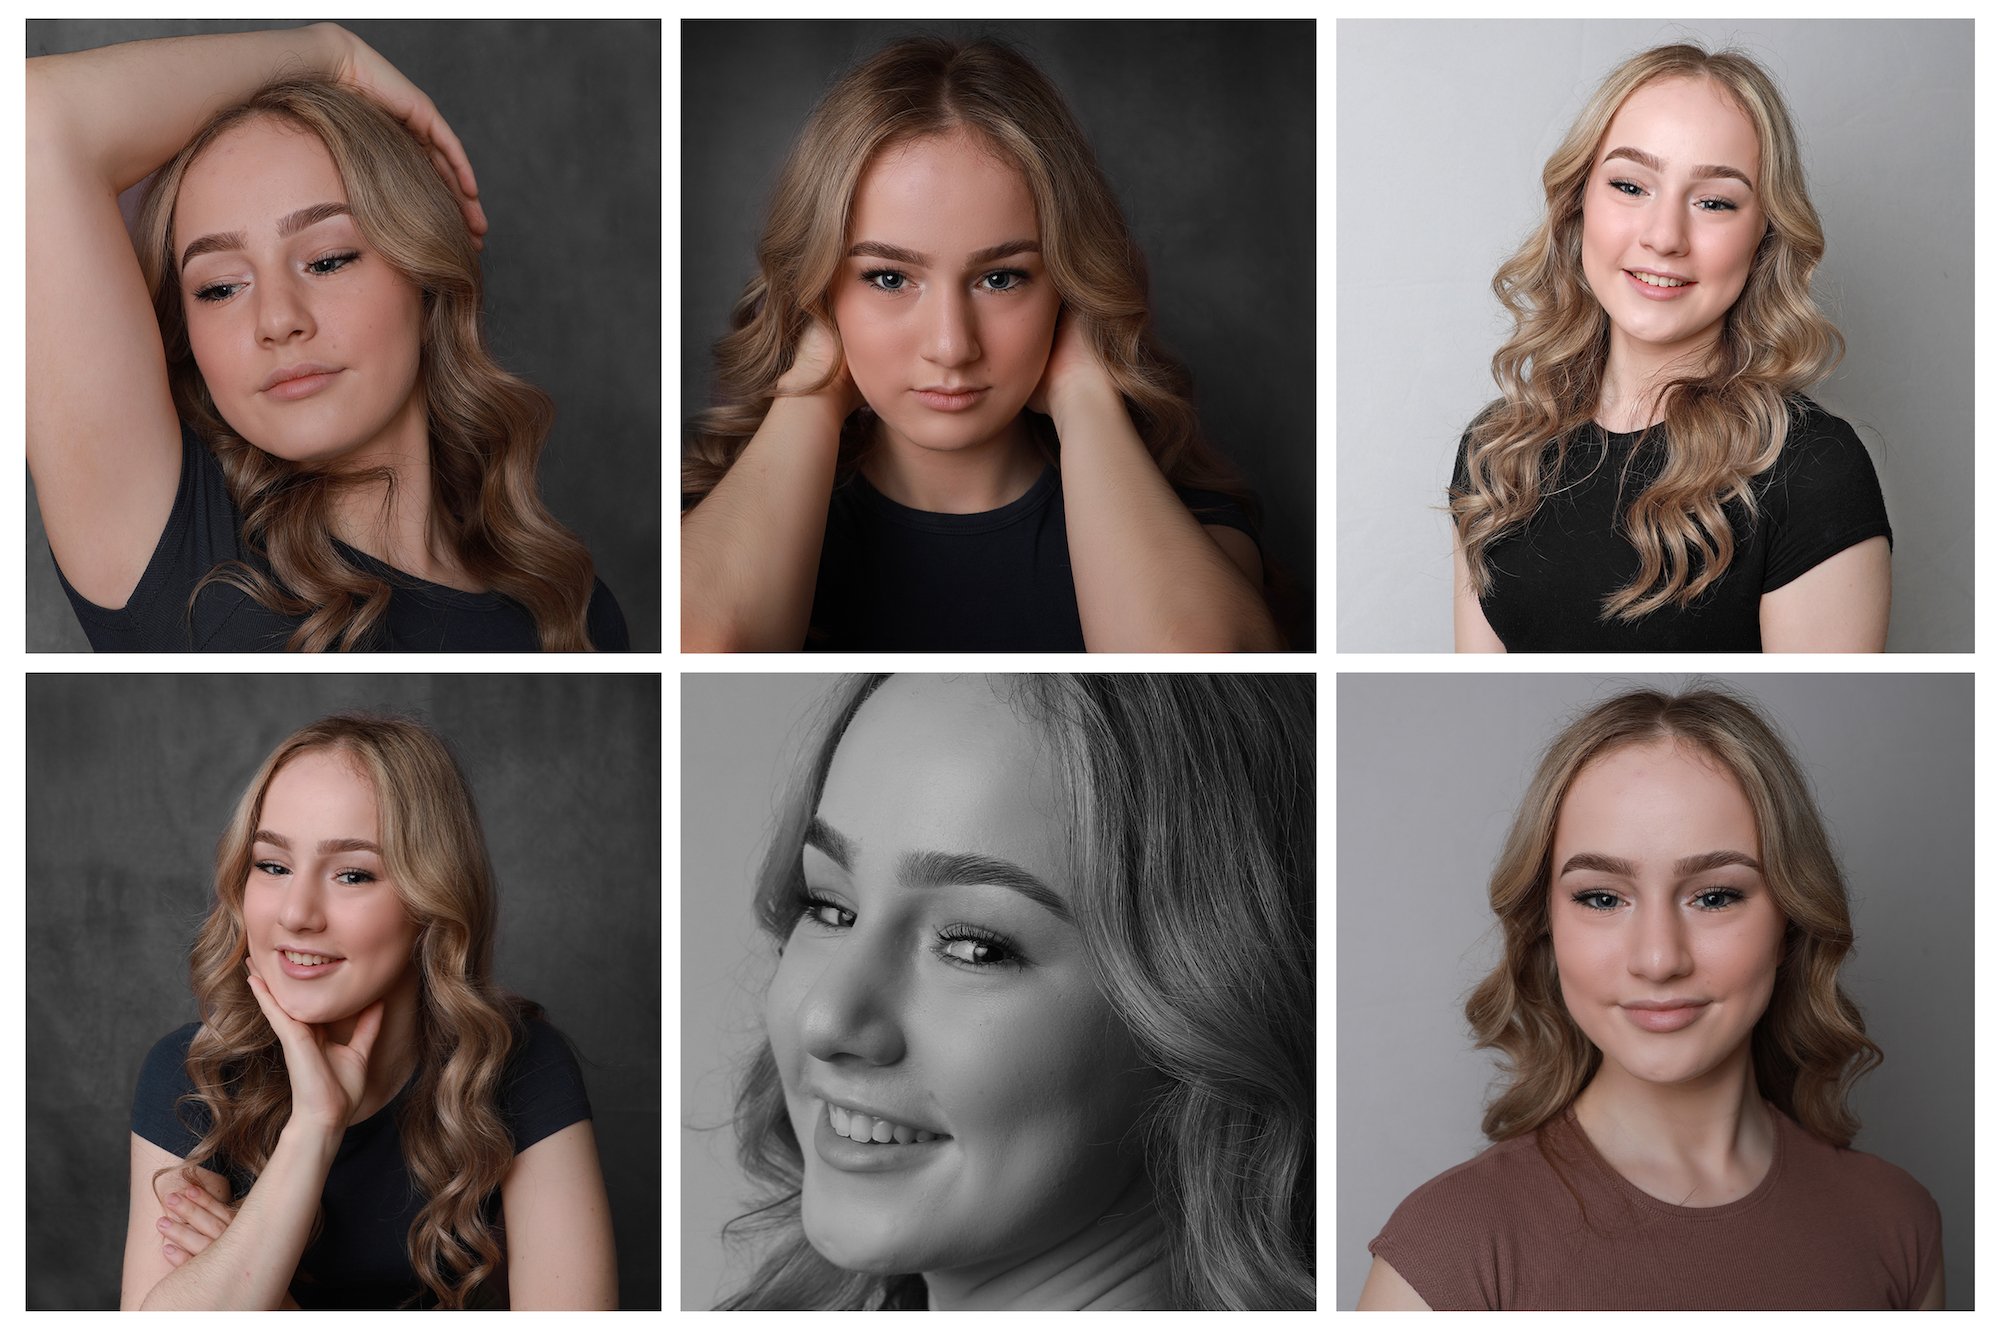 Model and Dancing Headshots for action portfolio